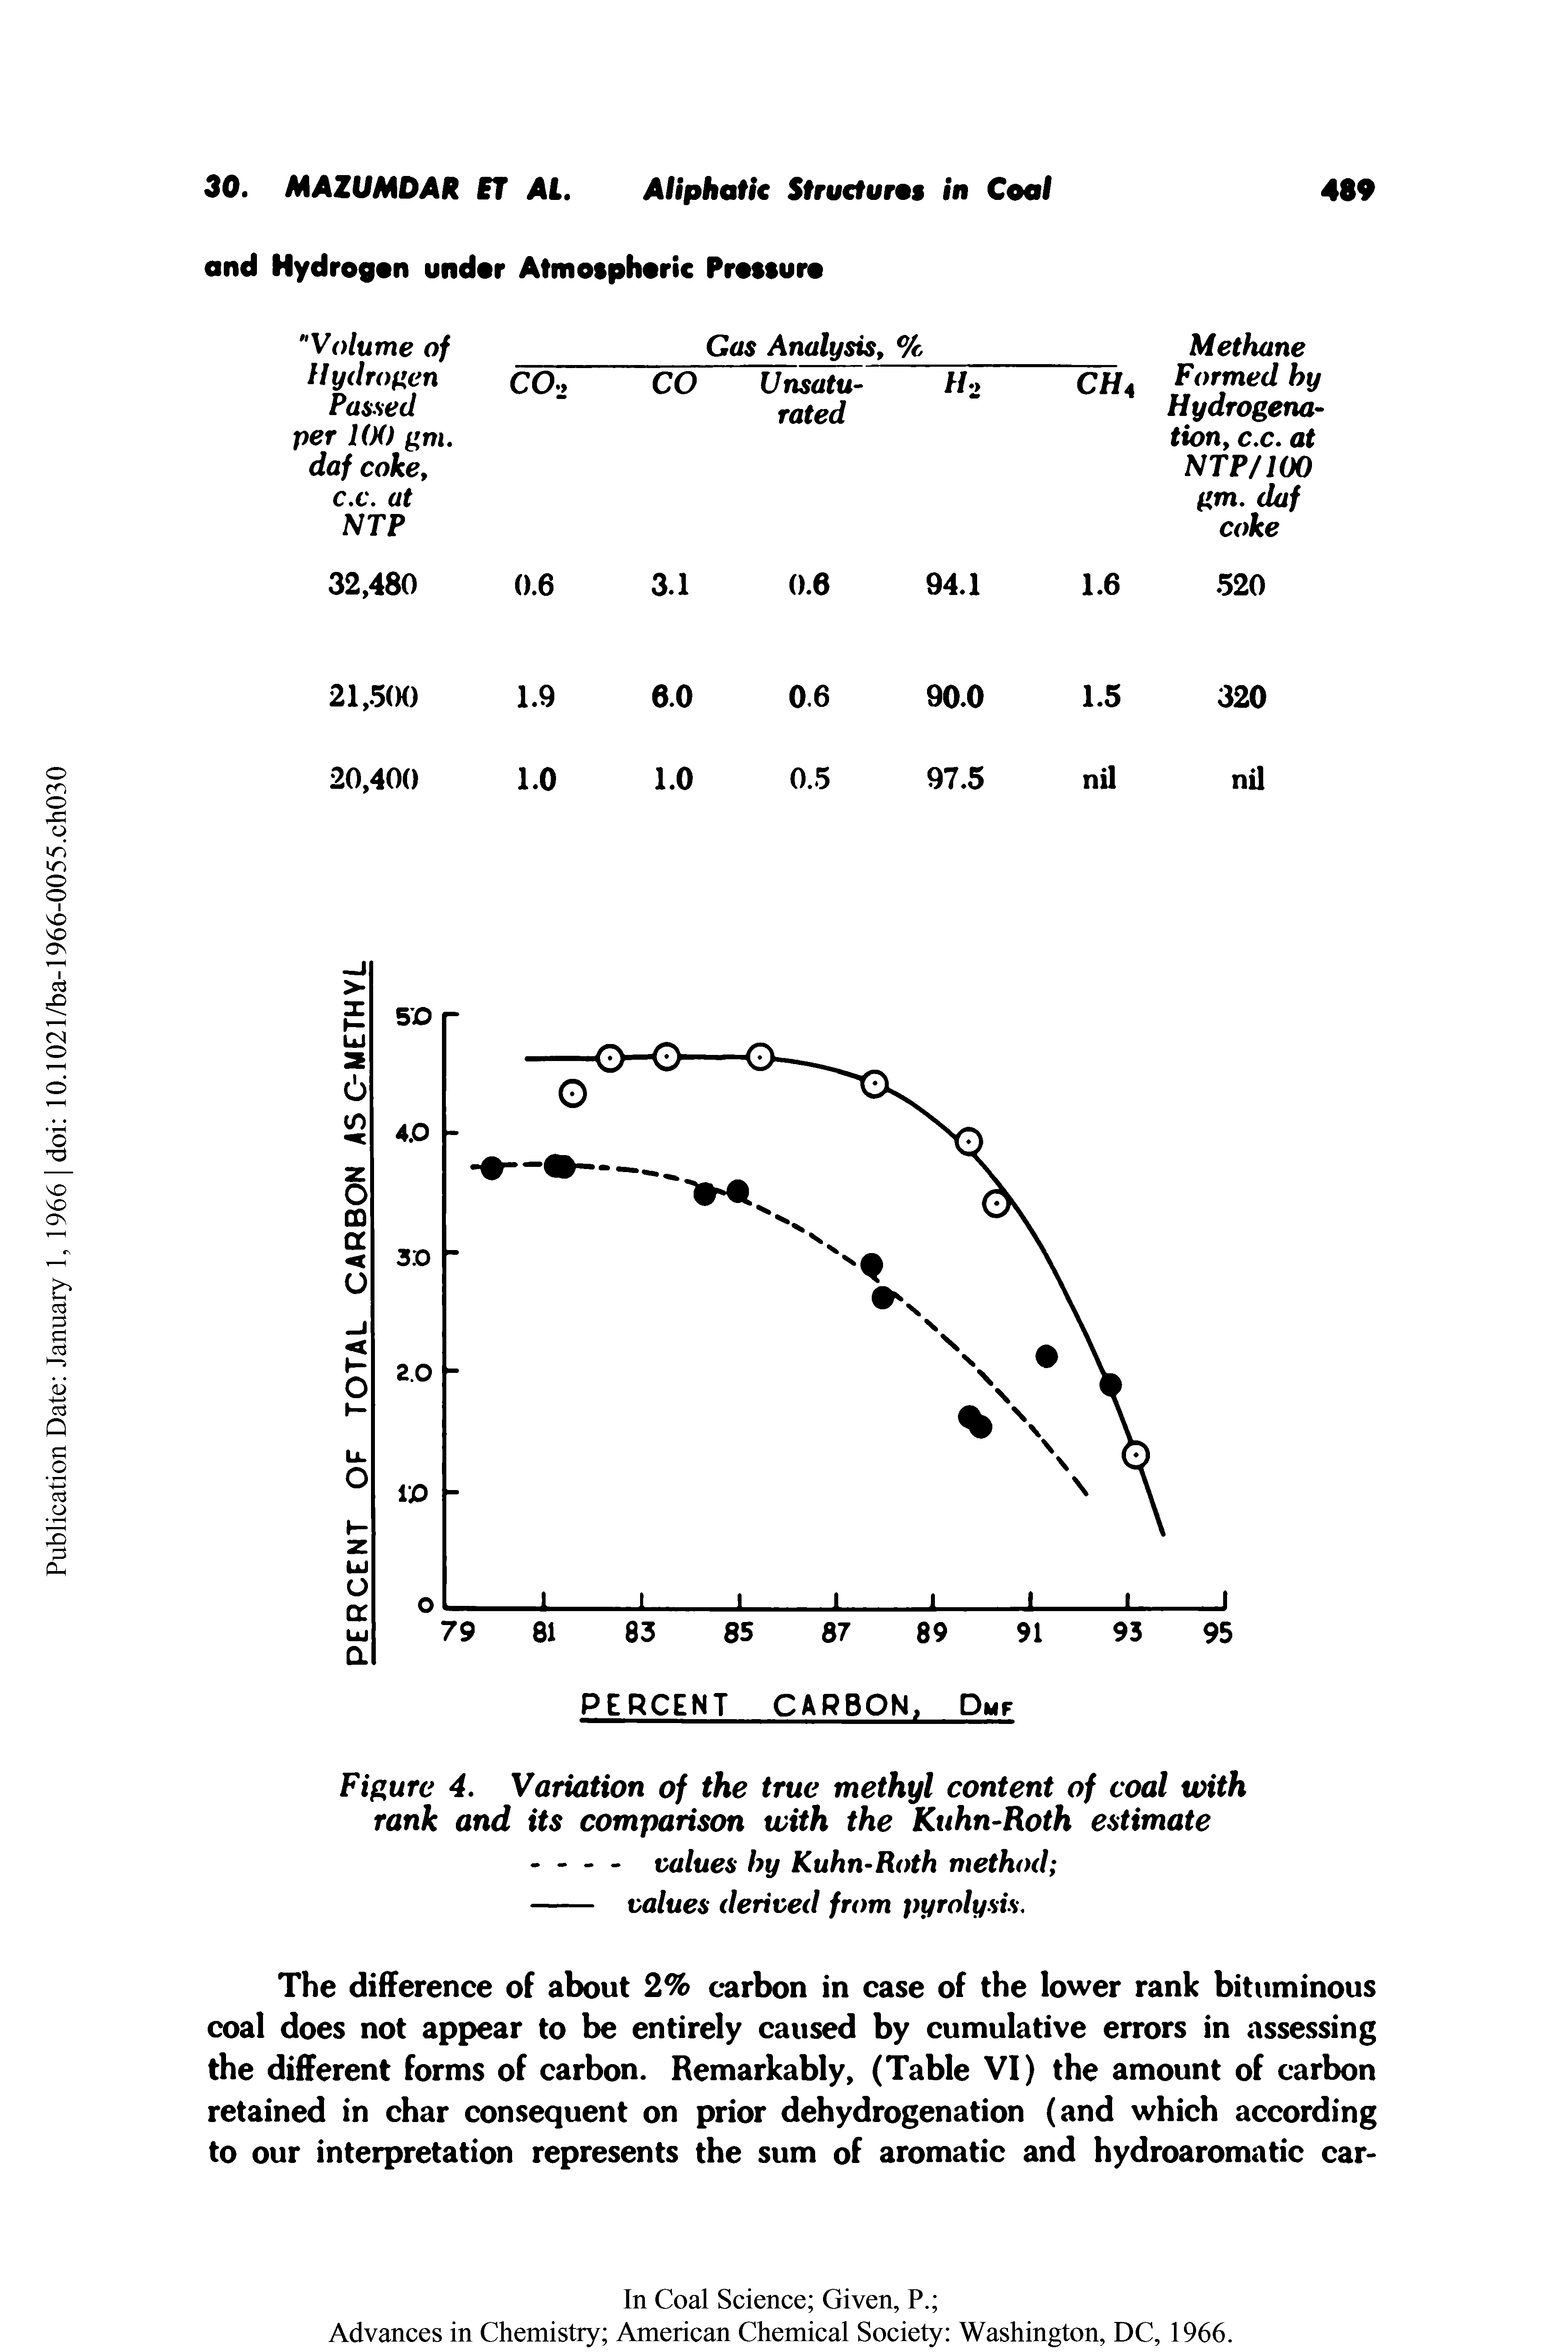 Figure 4. Variation of the true methyl content of coal with rank and its comparison with the Kuhn-Roth estimate...